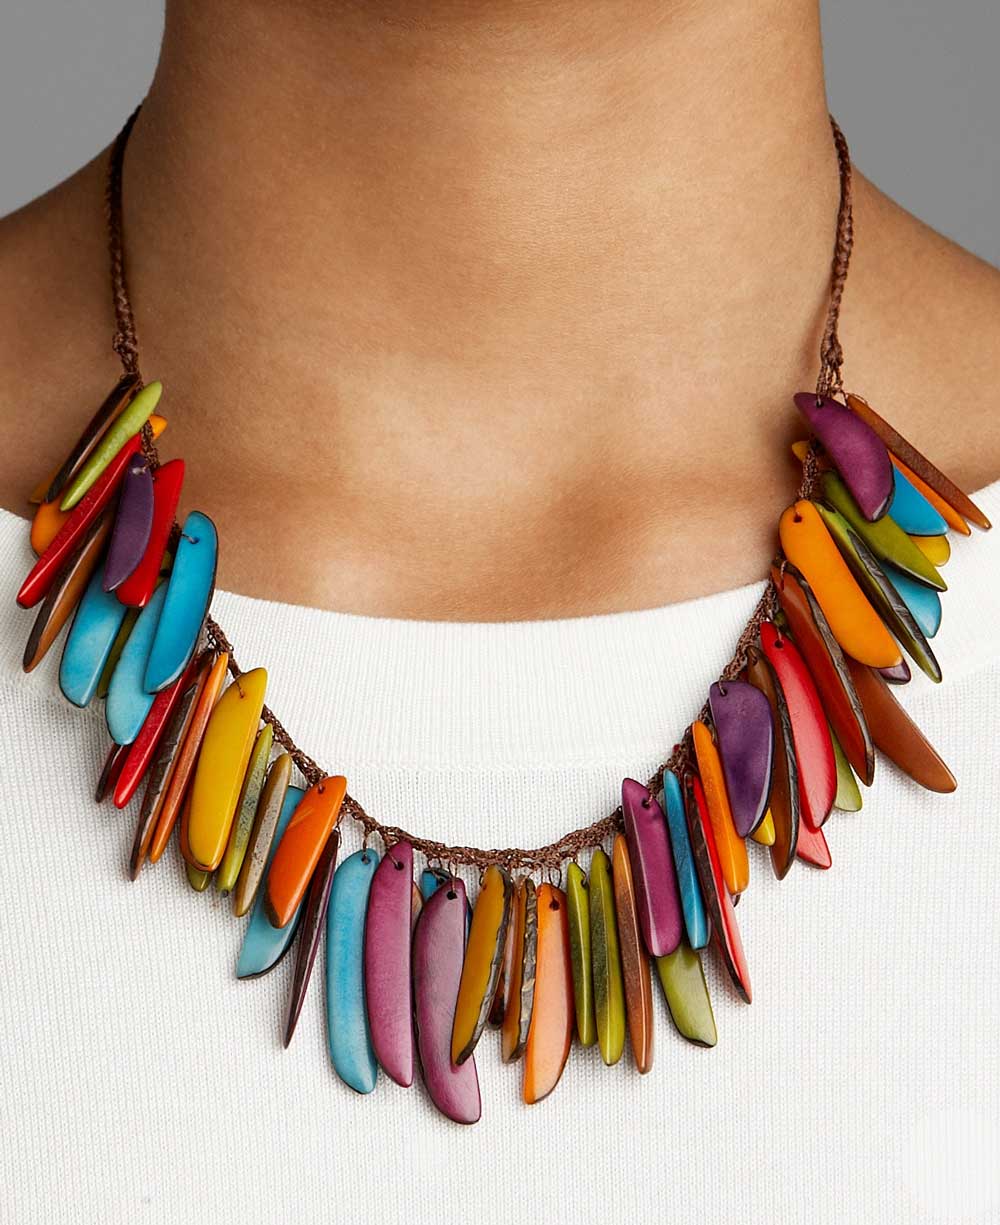 Colorful Eco-Friendly Tagua Necklace